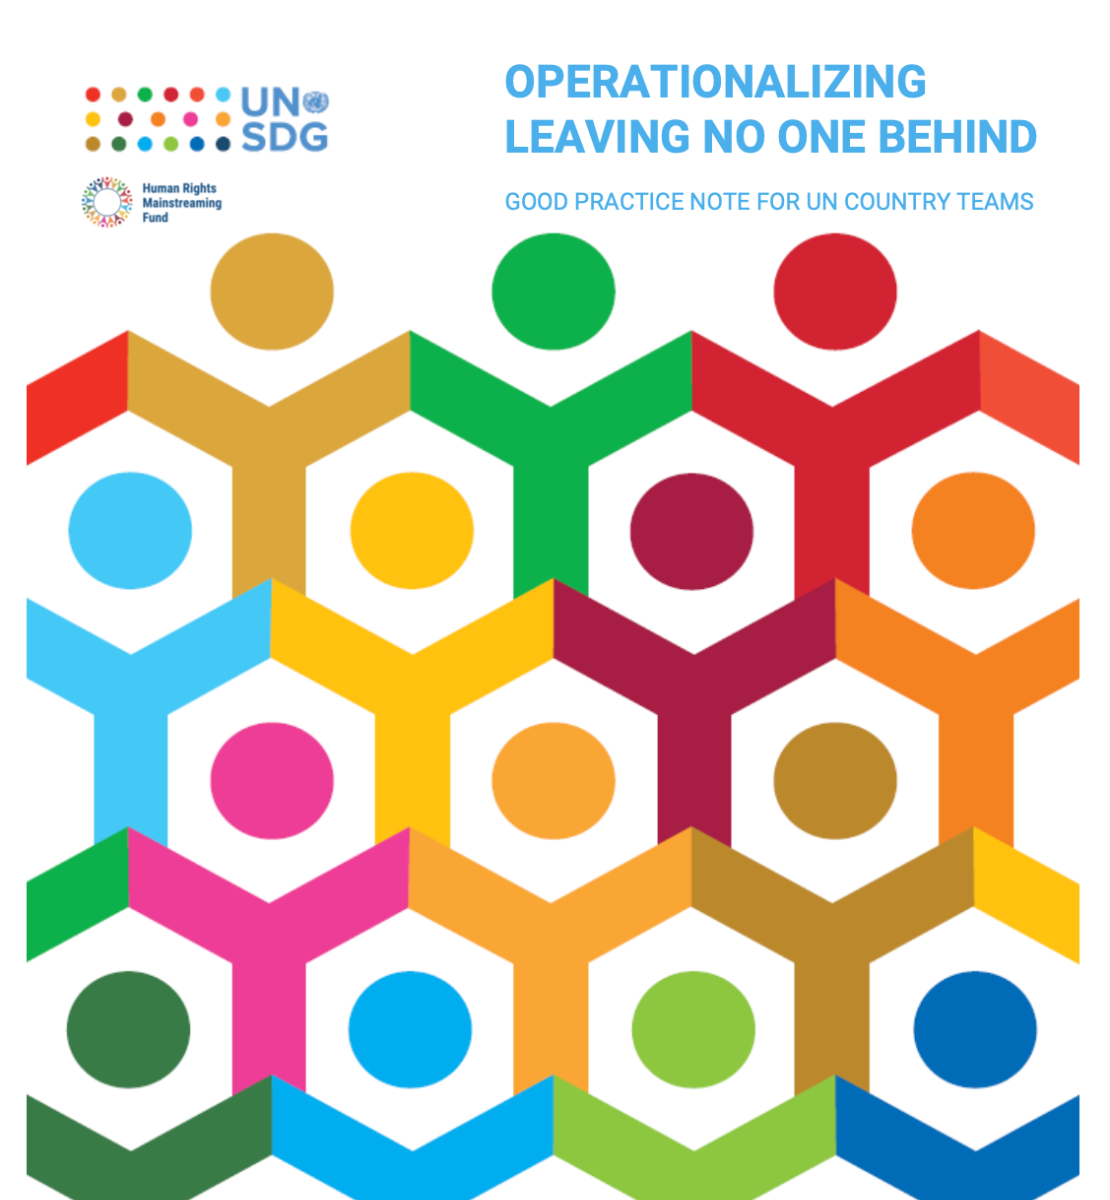 Publication cover with UNSDG logos in the top left corner and graphic elements in colors of the 17 SDGs.